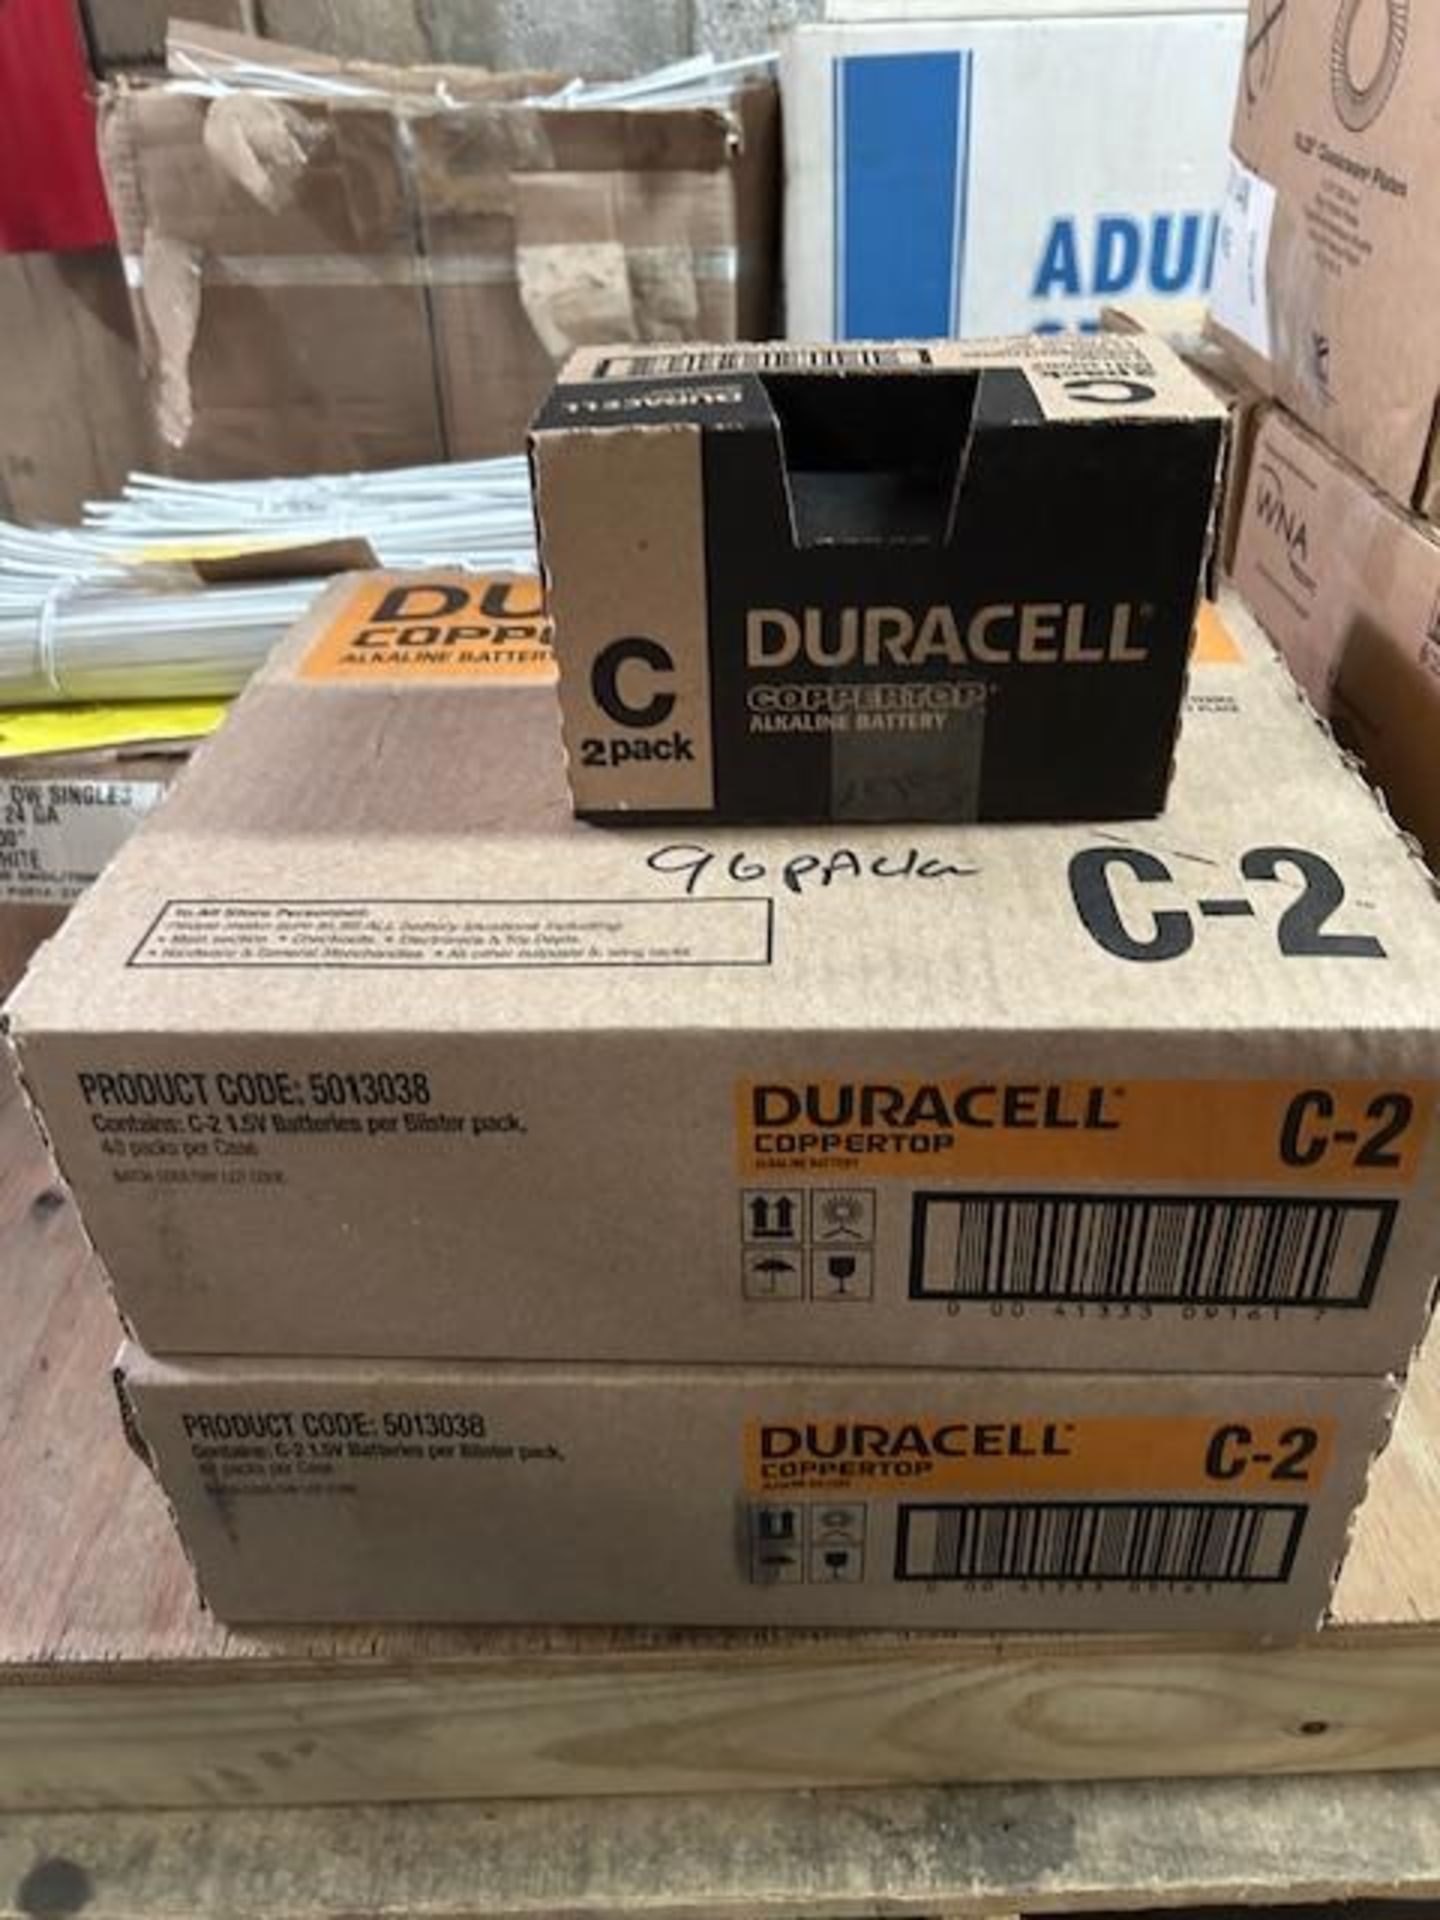 (96) Packs - Duracell 2-Pack C Batteries MN1400B2 (Expires 2032) - Image 2 of 2